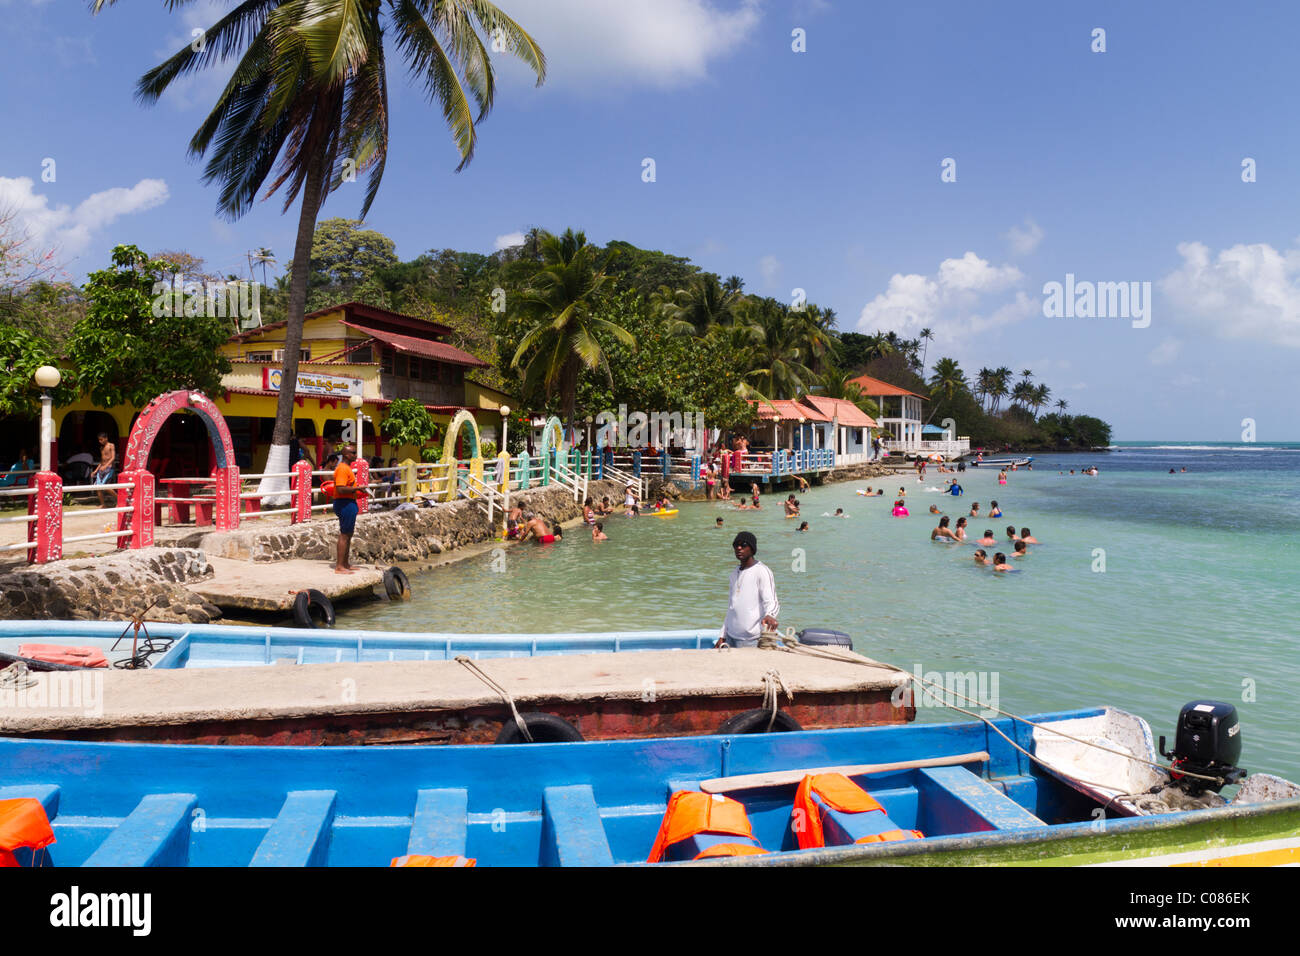 Tourists enjoying time at the beach under the eye of a Civil Protection life saver. Isla Grande, Colon, Republic of Panama. Stock Photo